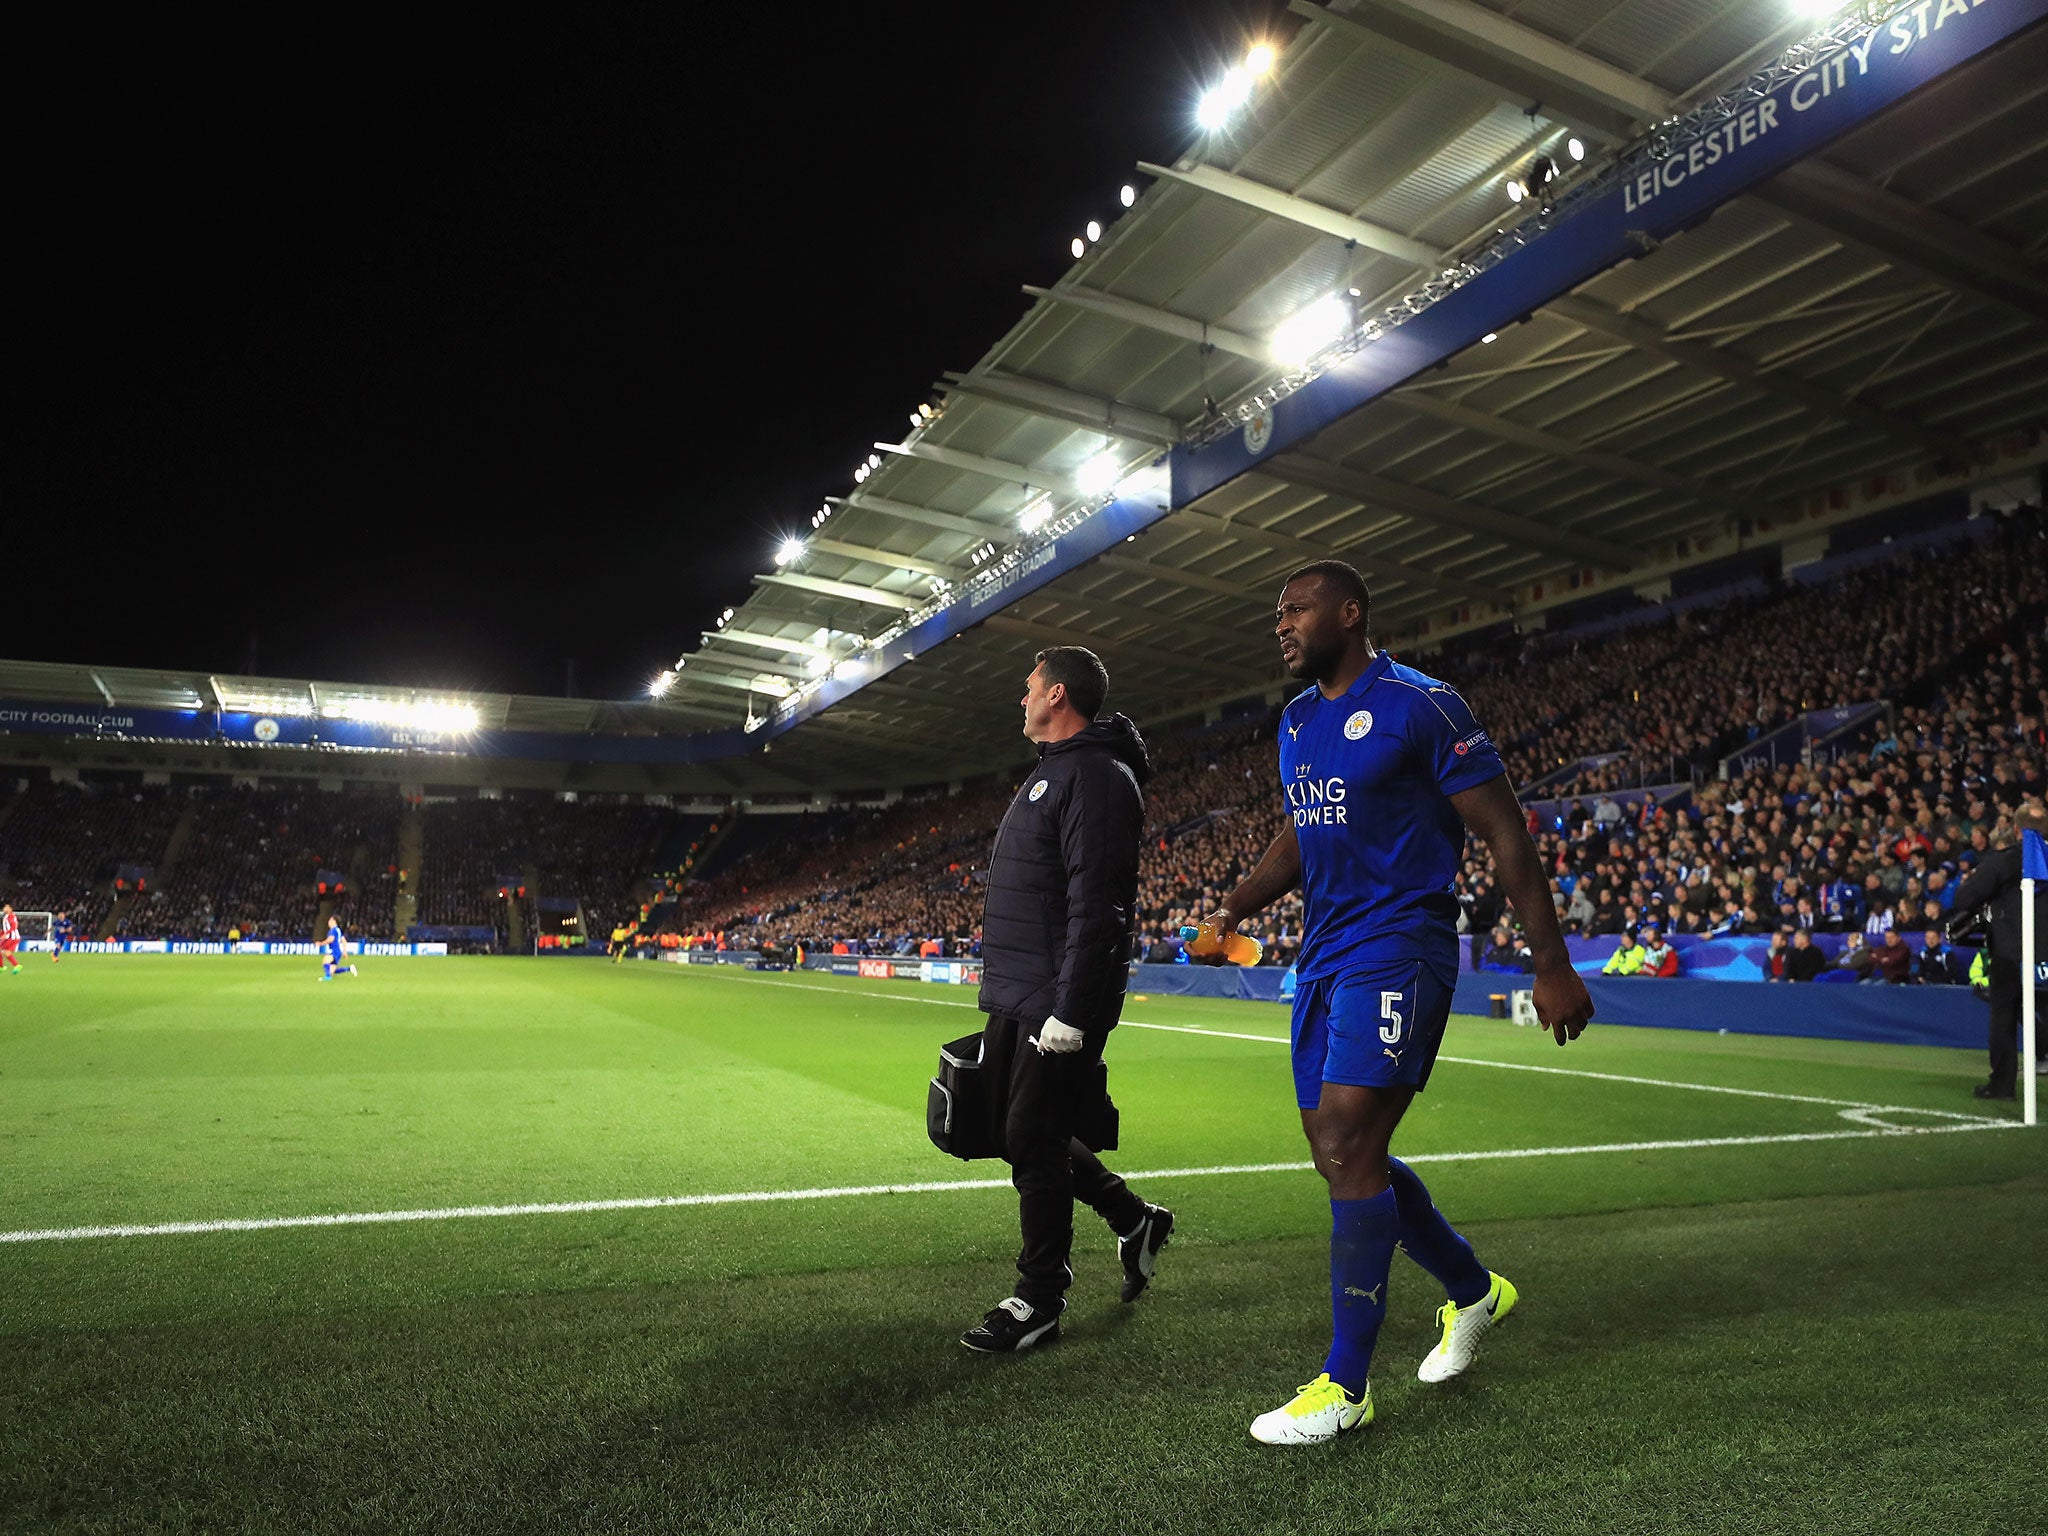 Wes Morgan was substituted off in Leicester's 1-1 draw with Atletico Madrid last week